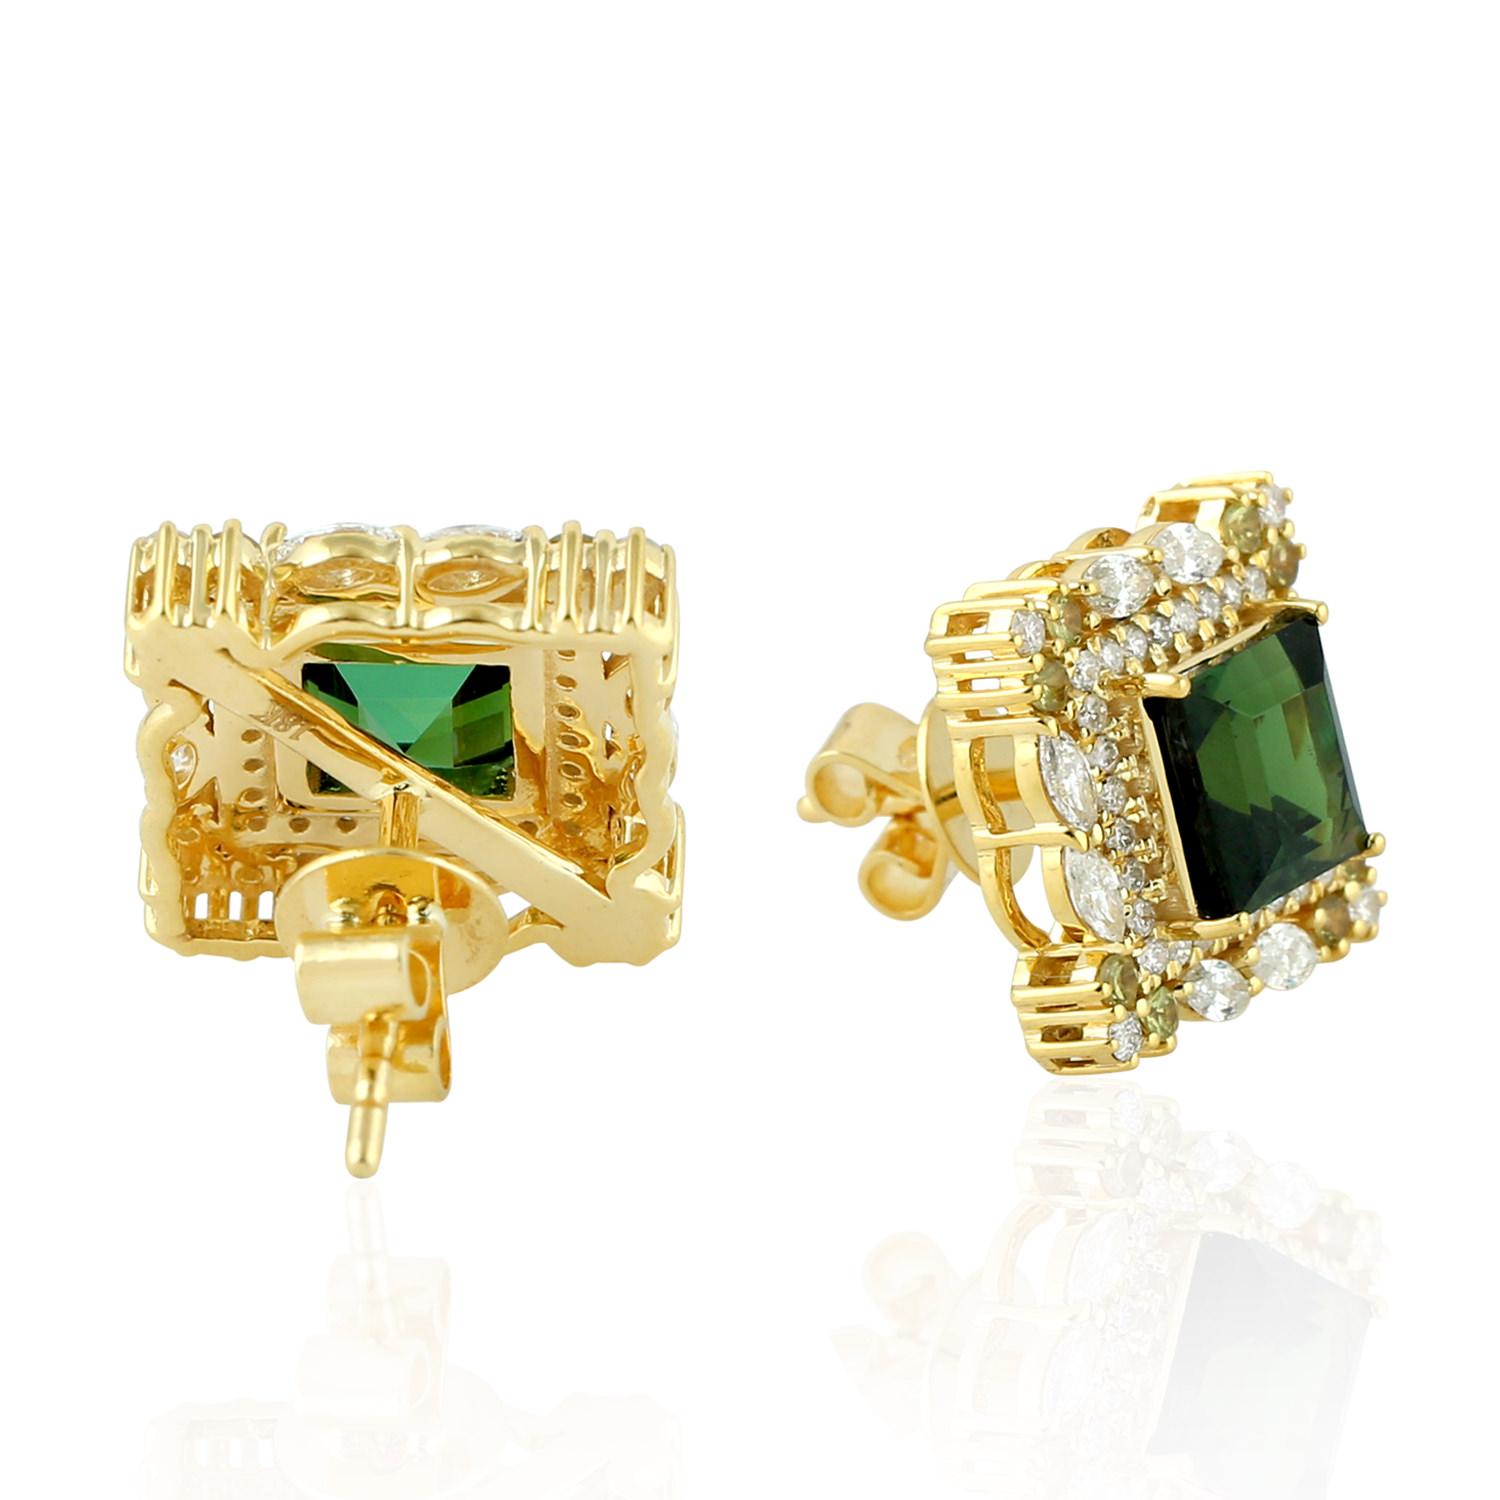 Cast from 18K gold, these beautiful stud earrings are hand set in 3.3 carats tourmaline, peridot and .80 carats of sparkling diamonds.

FOLLOW  MEGHNA JEWELS storefront to view the latest collection & exclusive pieces.  Meghna Jewels is proudly